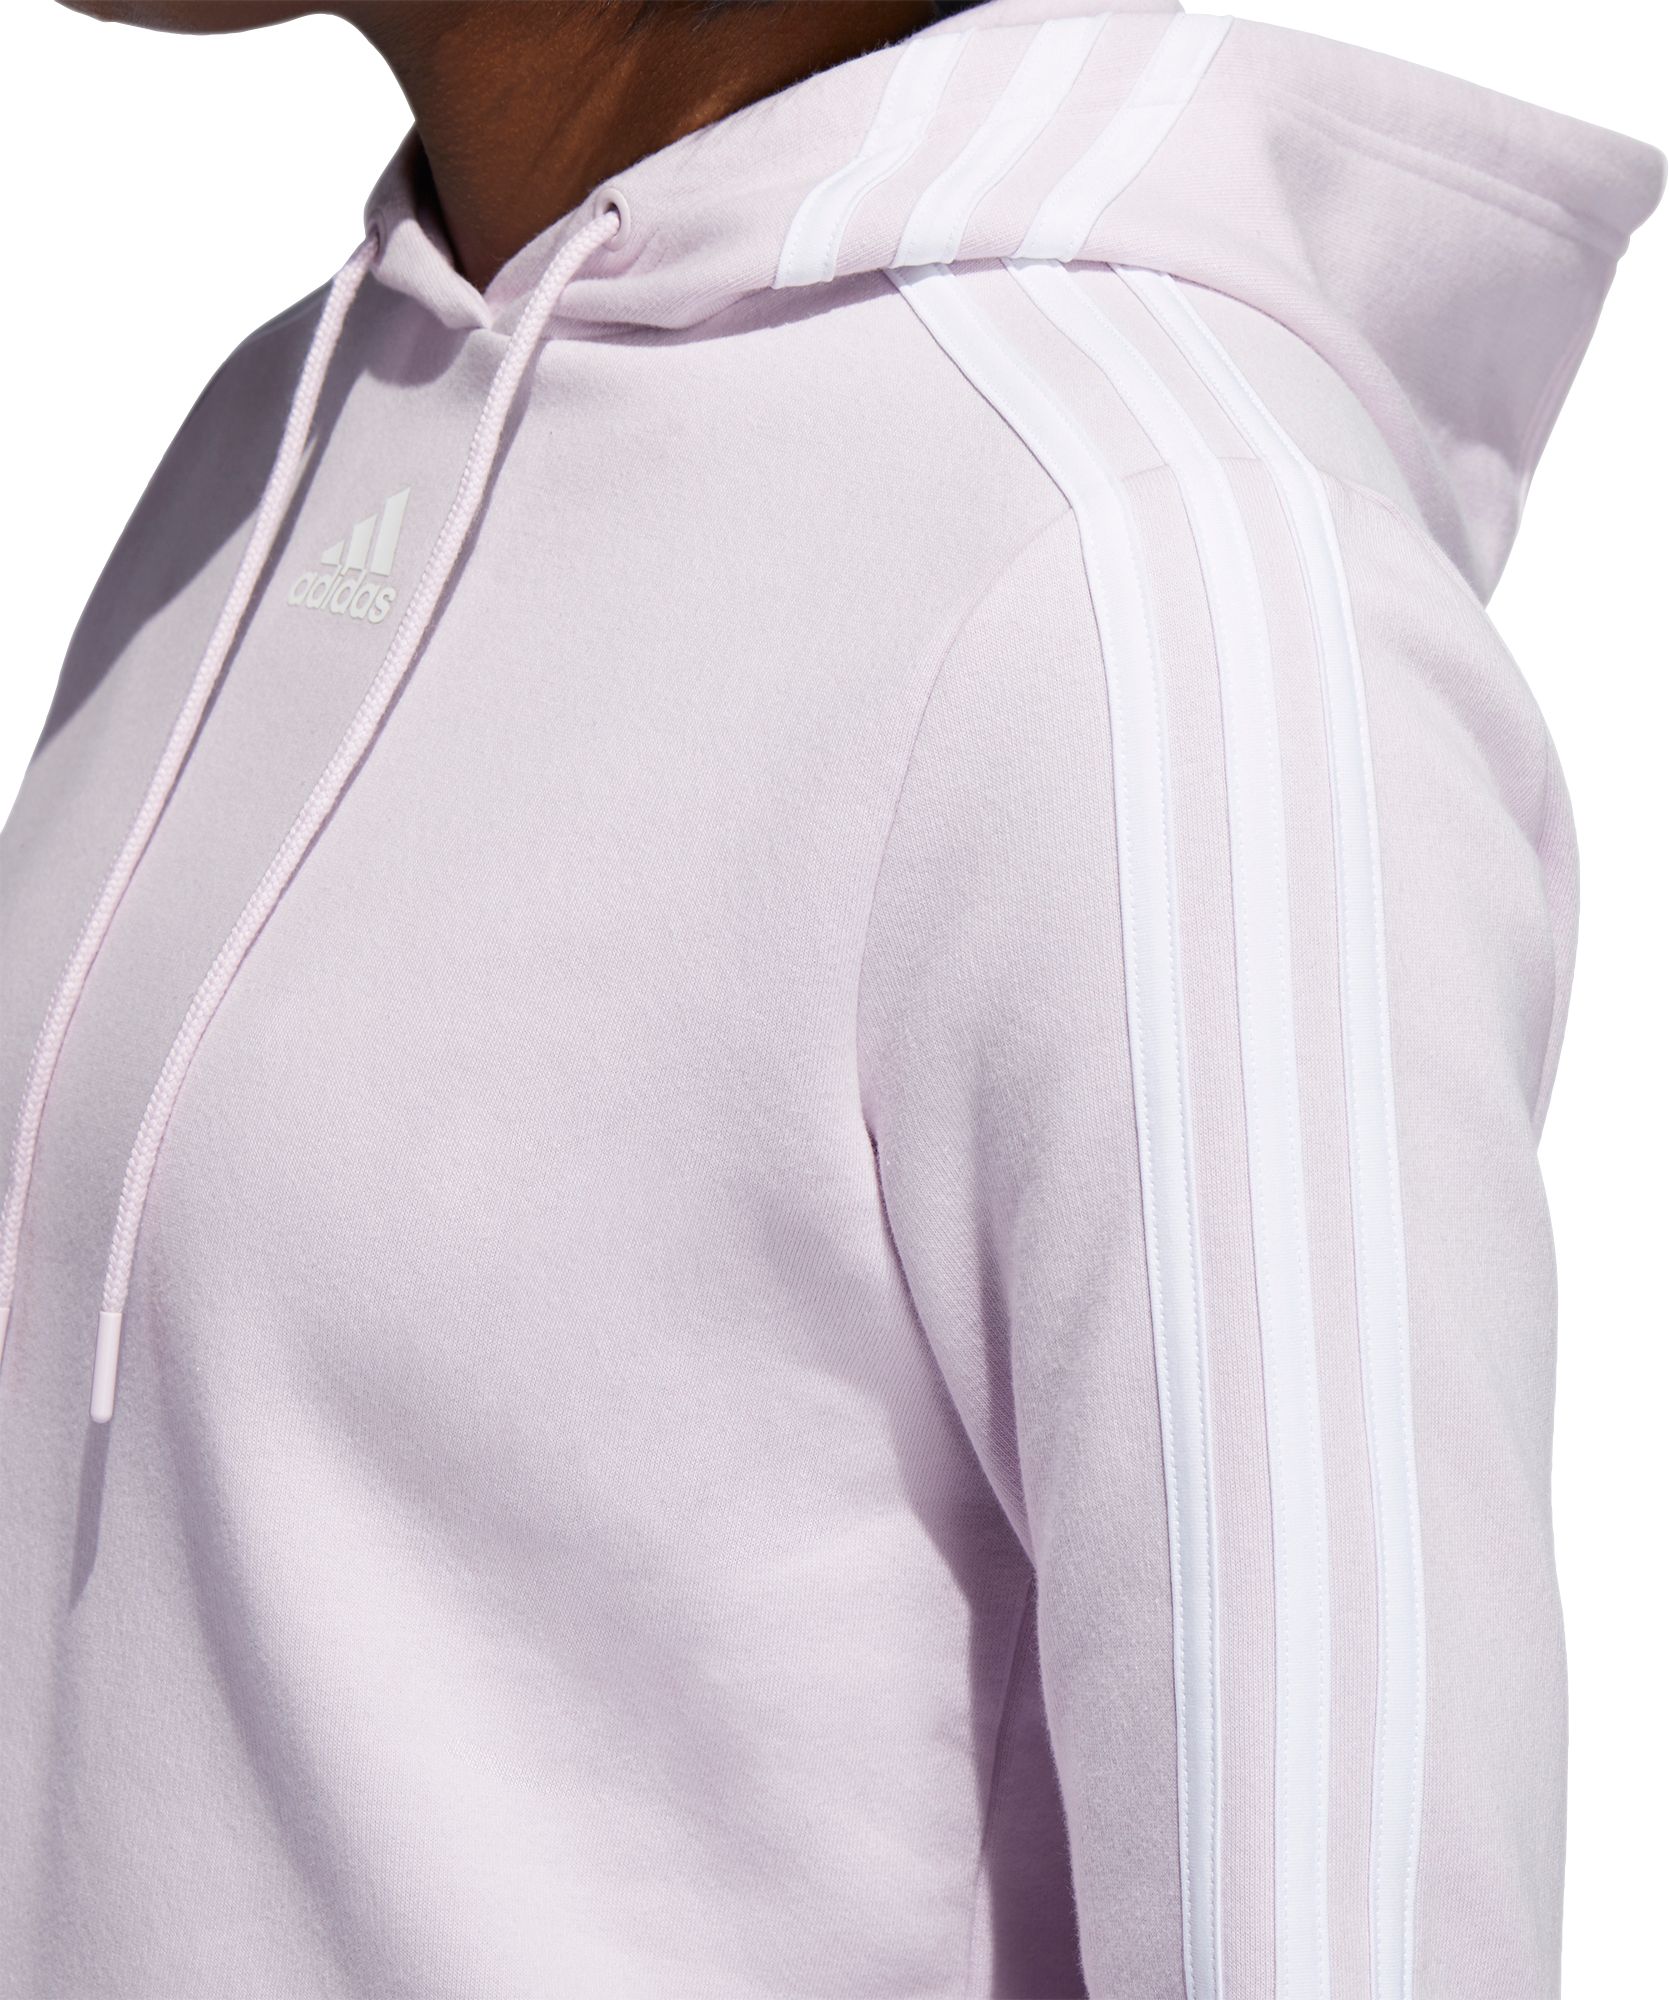 adidas women's post game cropped hoodie